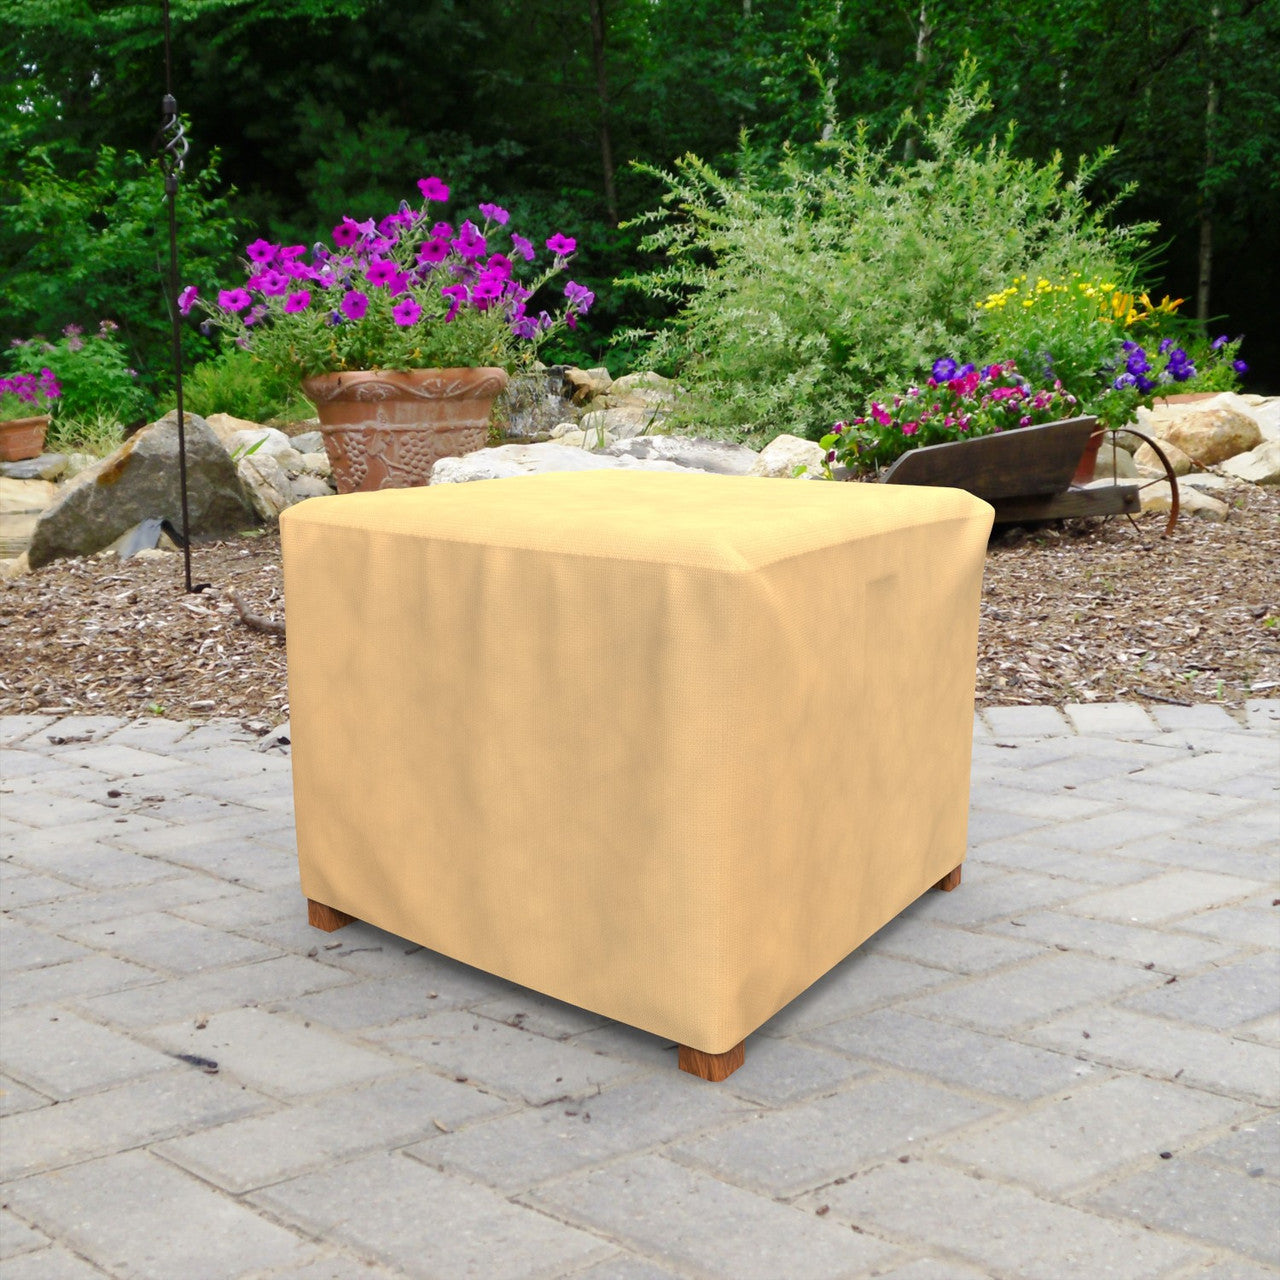 Budge Industries All Seasons Square Patio Table/Ottoman Cover